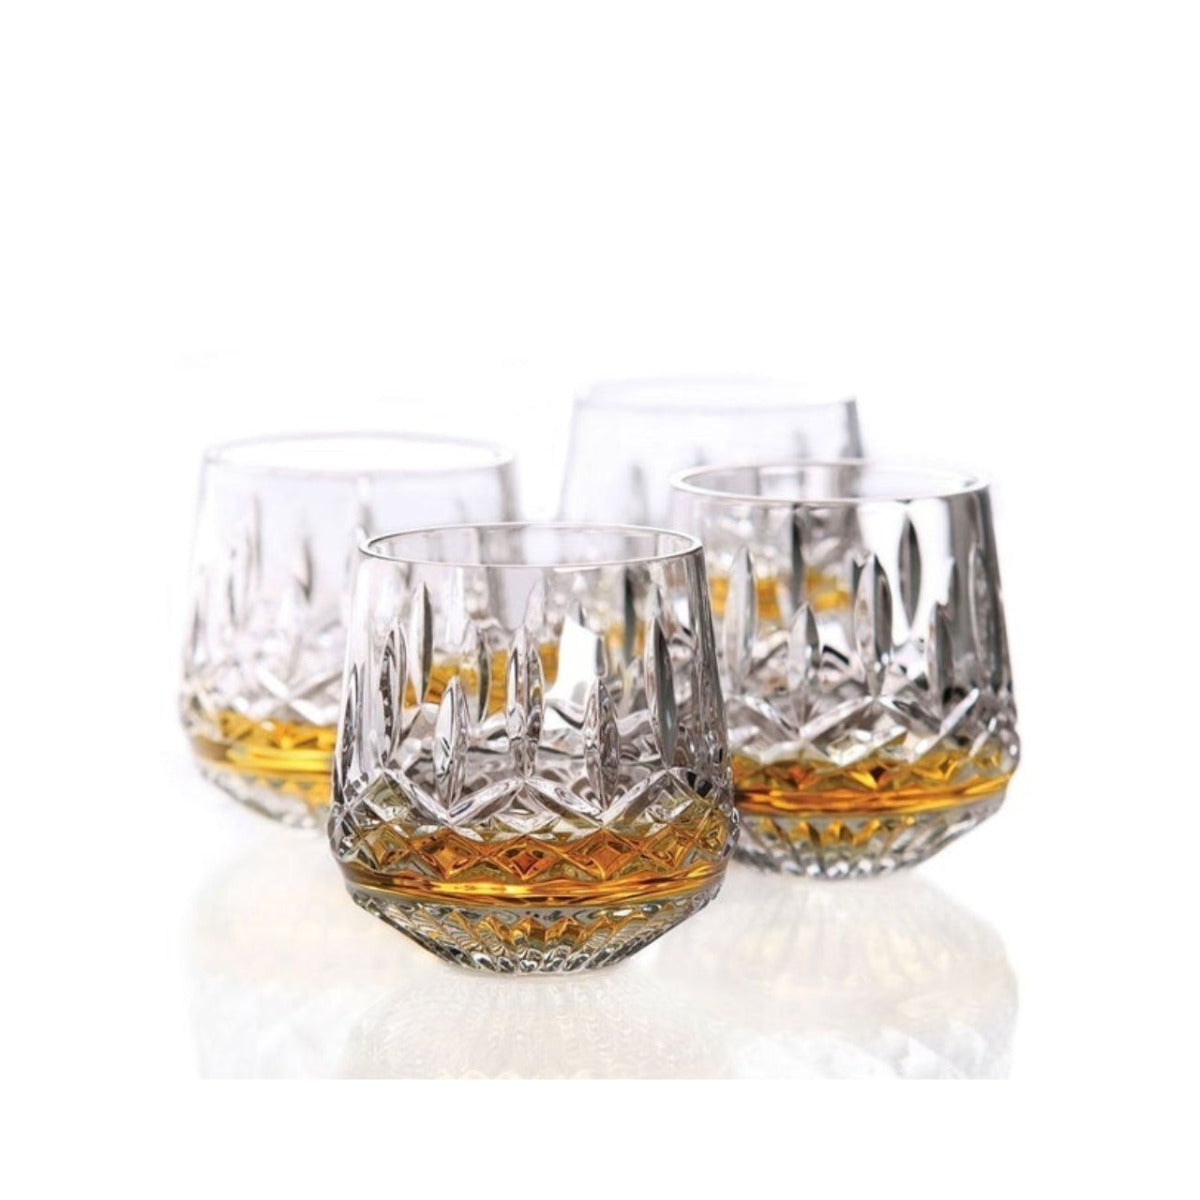 Waterford Crystal Lismore Whiskey Glass Set of 4  The Waterford Lismore pattern is a stunning combination of brilliance and clarity. You could honour Lismore's Irish roots serving drams in these Lismore Old Fashioned glasses, or use them to serve spirits 'on the rocks.'